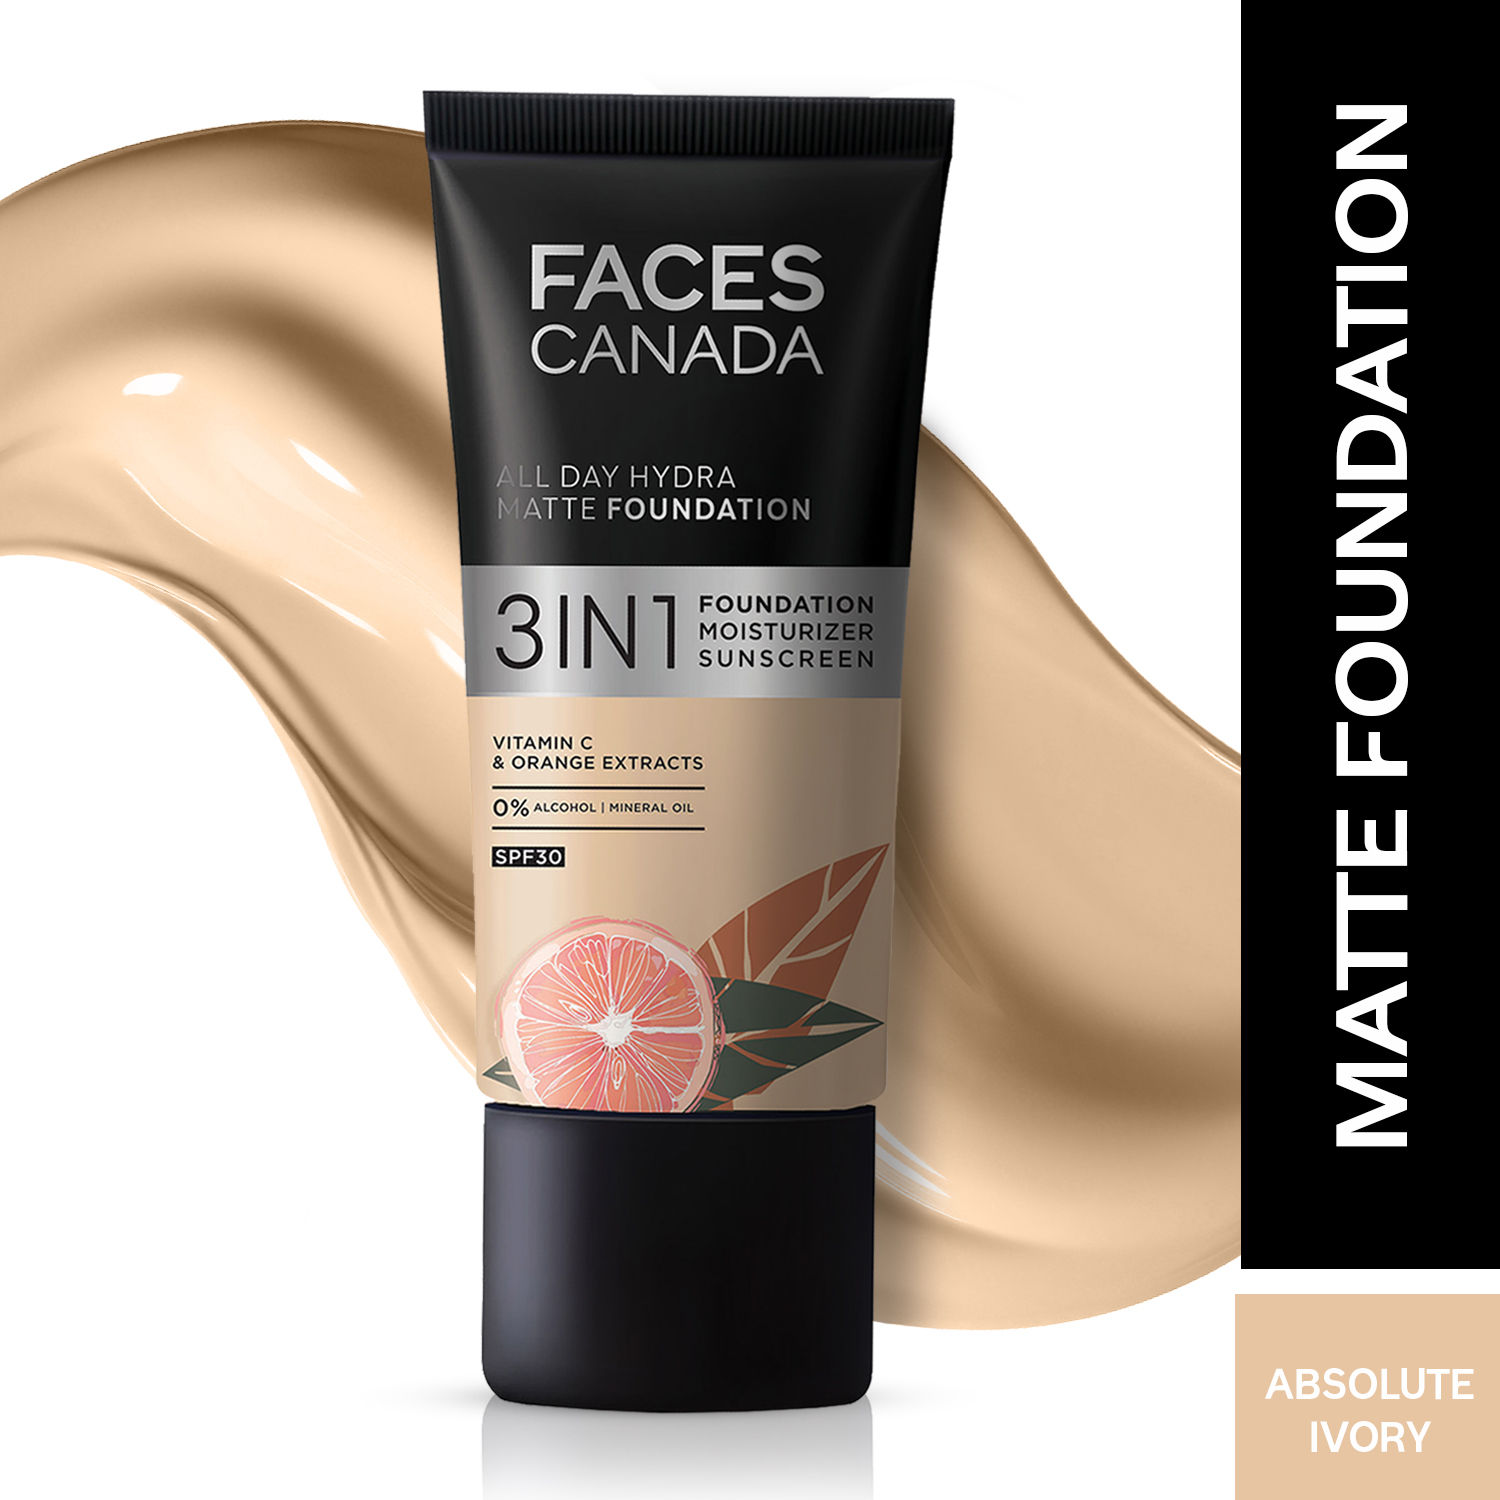 Buy FACES CANADA All Day Hydra Matte Foundation | 3-in-1 Foundation + Moisturizer + SPF30 | 10HR Long Wear | Buildable Coverage | Absolute Ivory, 25ml - Purplle